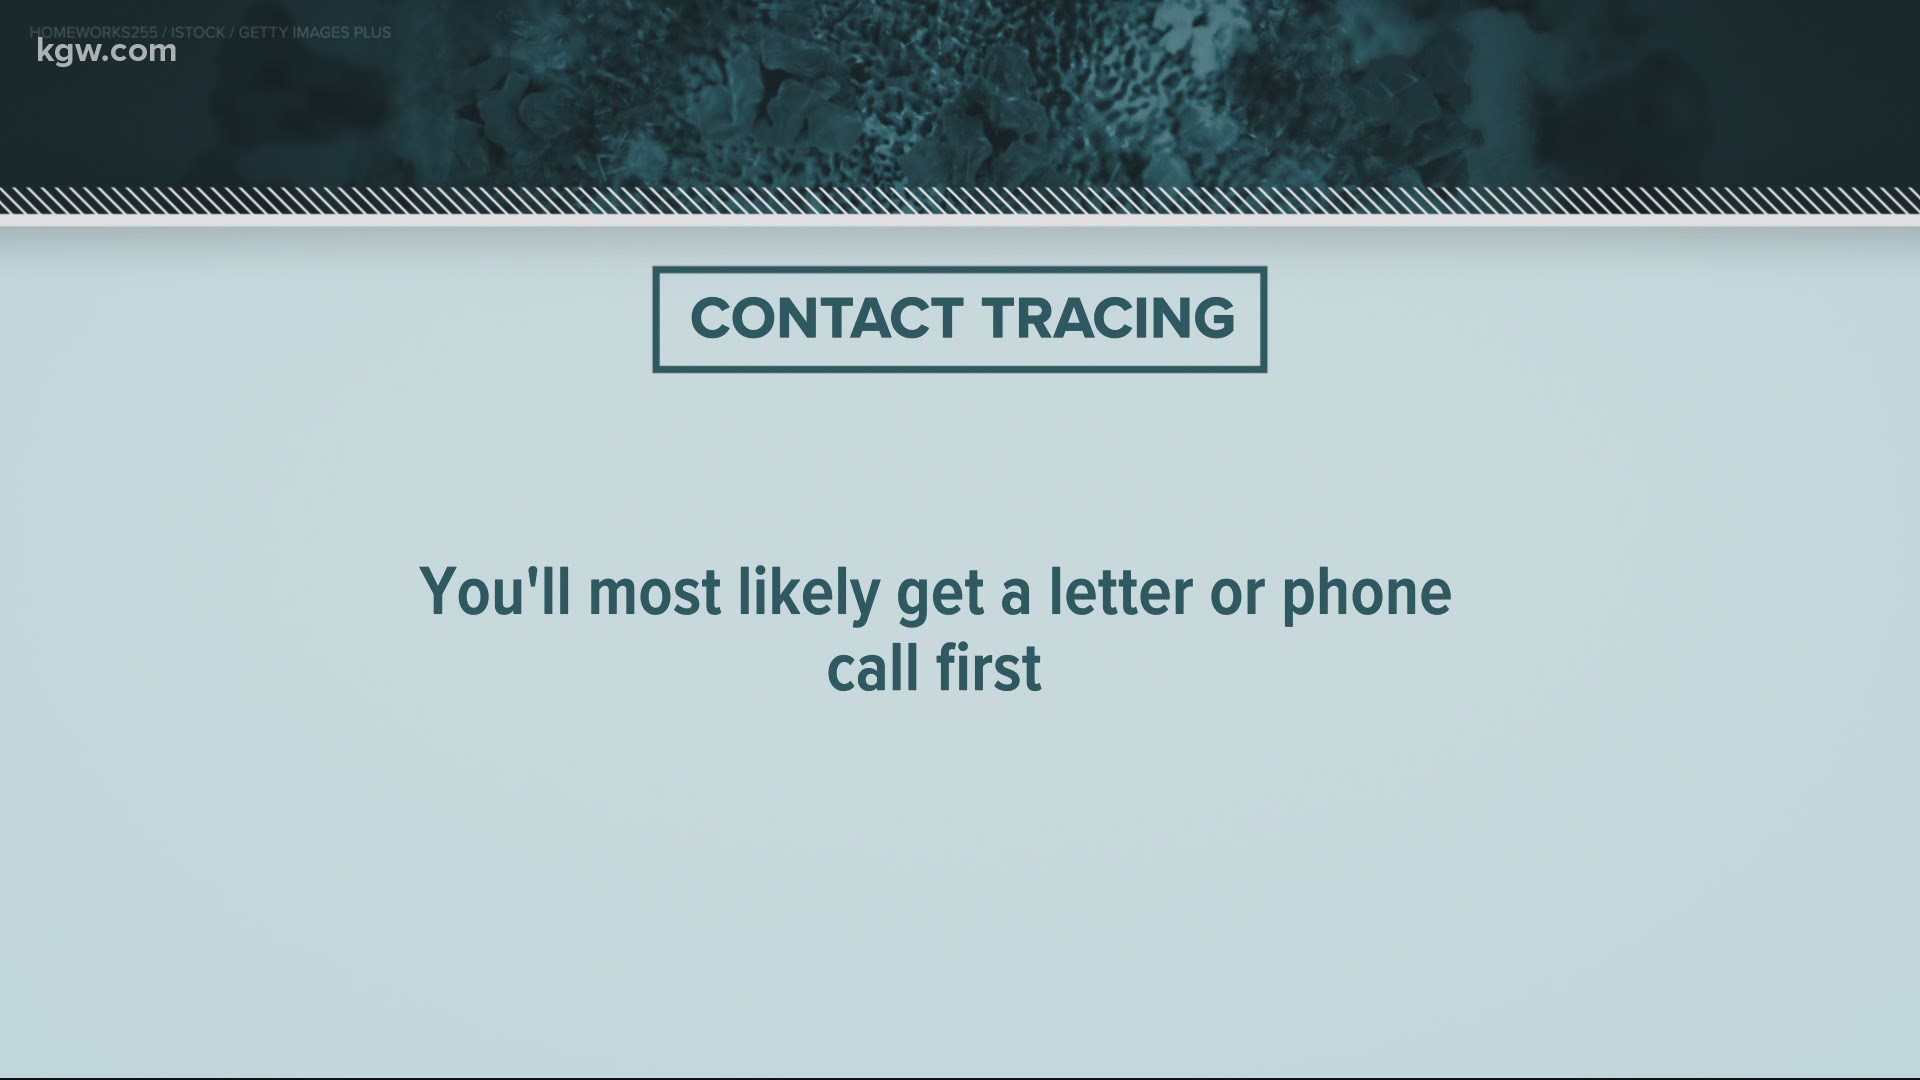 Oregon Attorney General's office and the FTC warn scammers may pretend to be contact tracers to get your personal information.